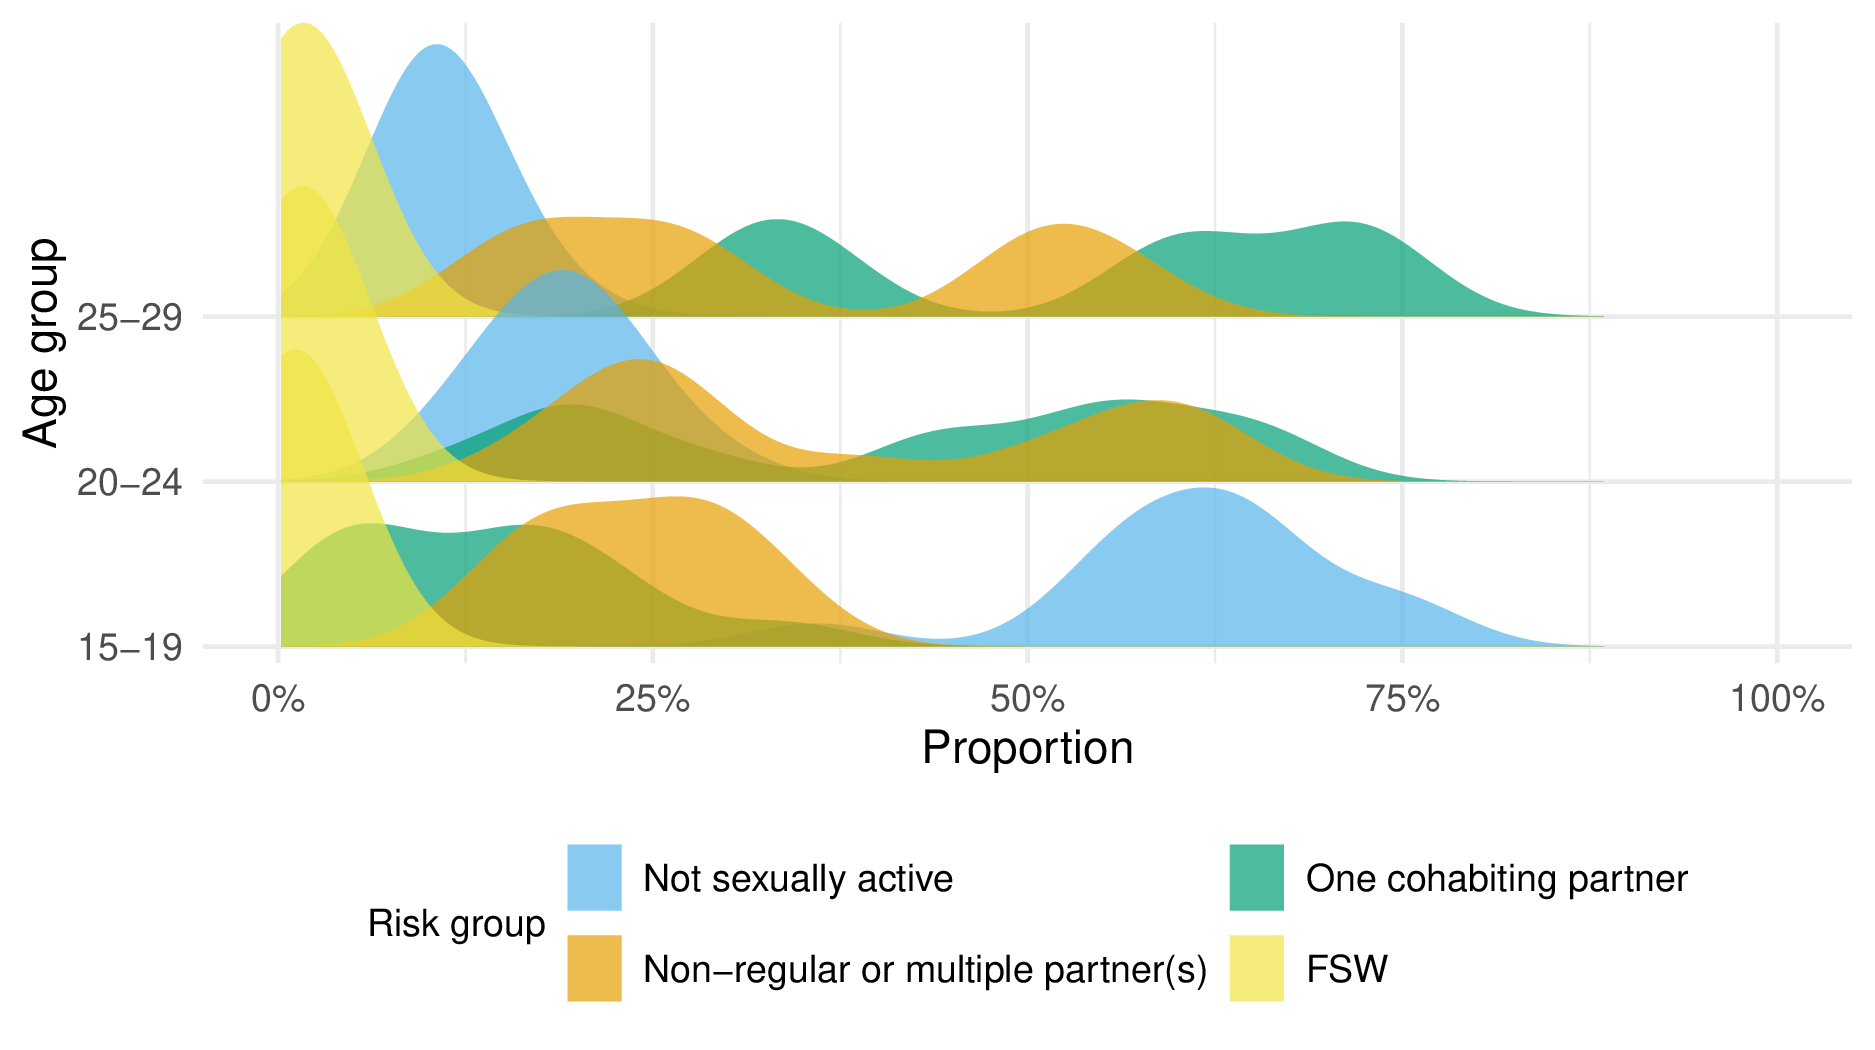 For the 20-24 and 25-29 age groups, the proportion of AGYW in the one cohabiting partner and non-regular or multiple partner(s) risk groups was bimodal.